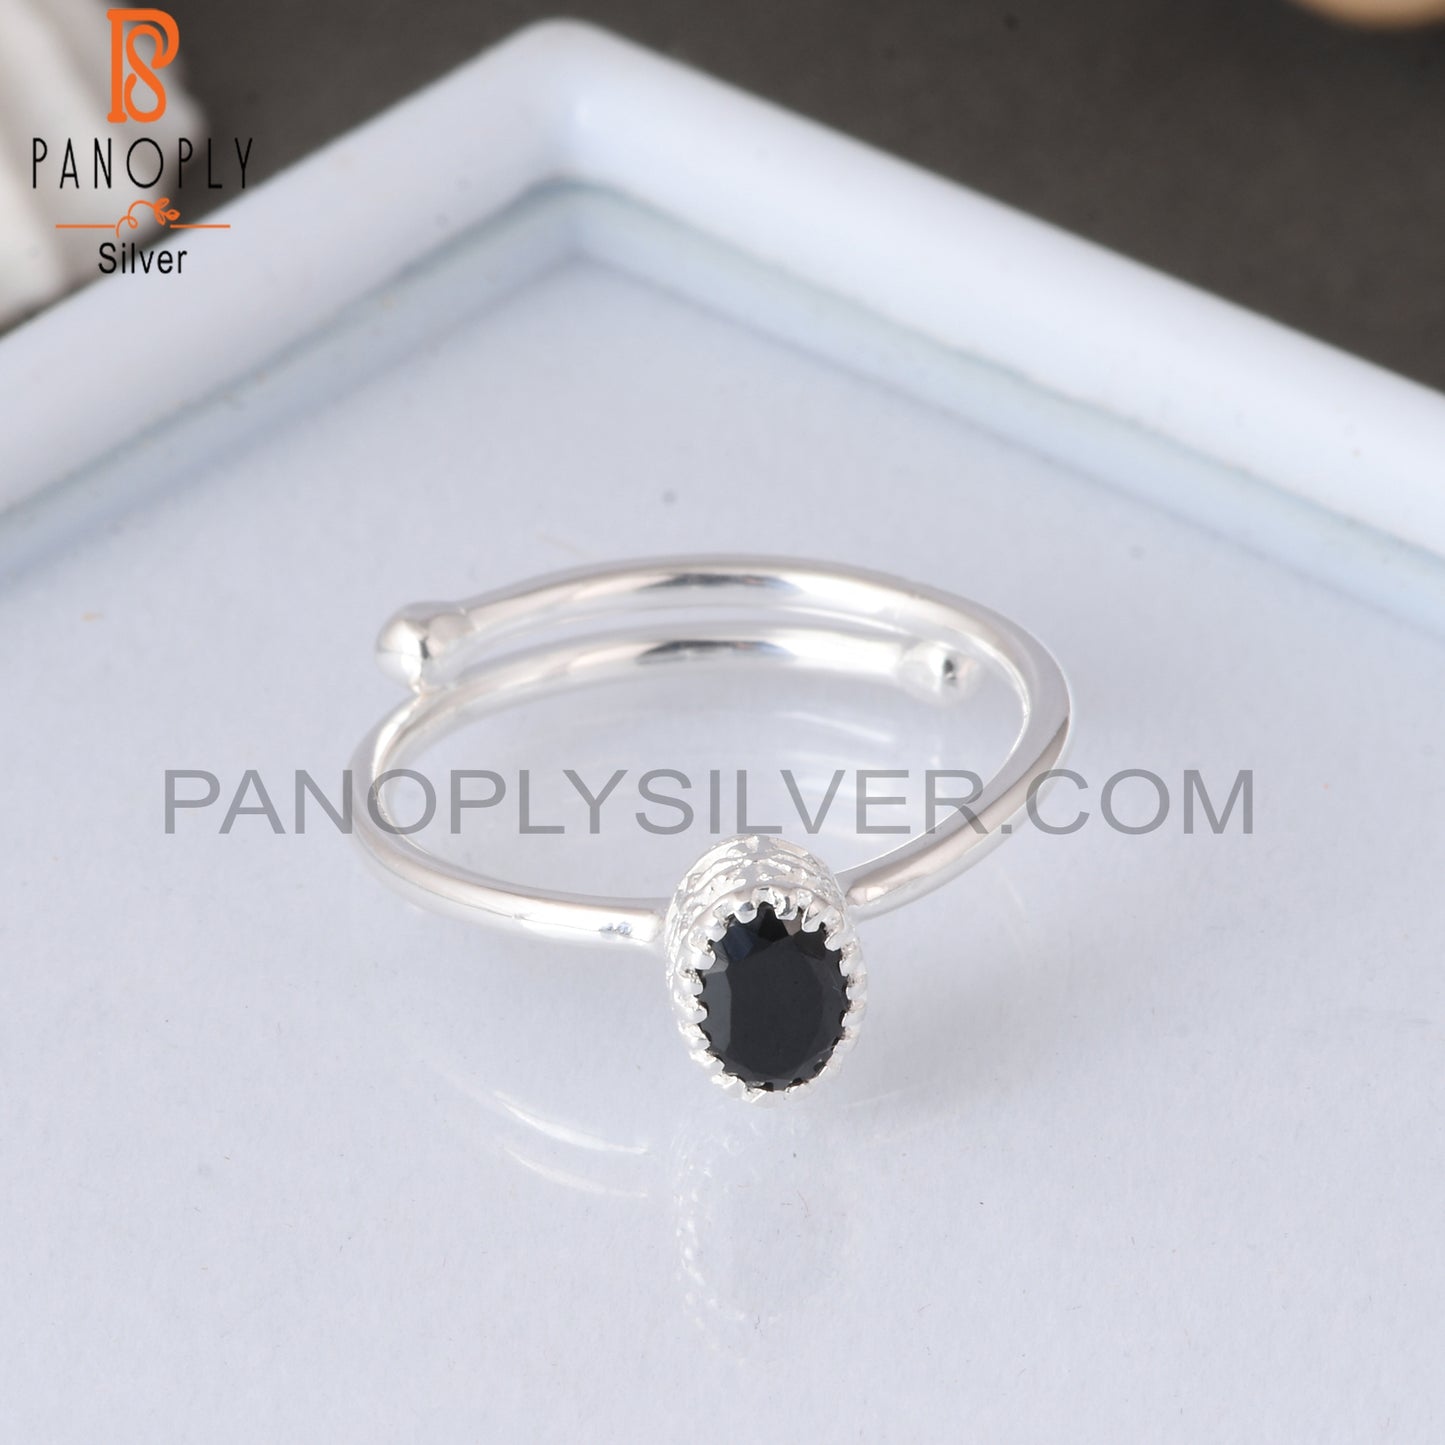 Black Spinal Oval Shape 925 Sterling Silver Ring